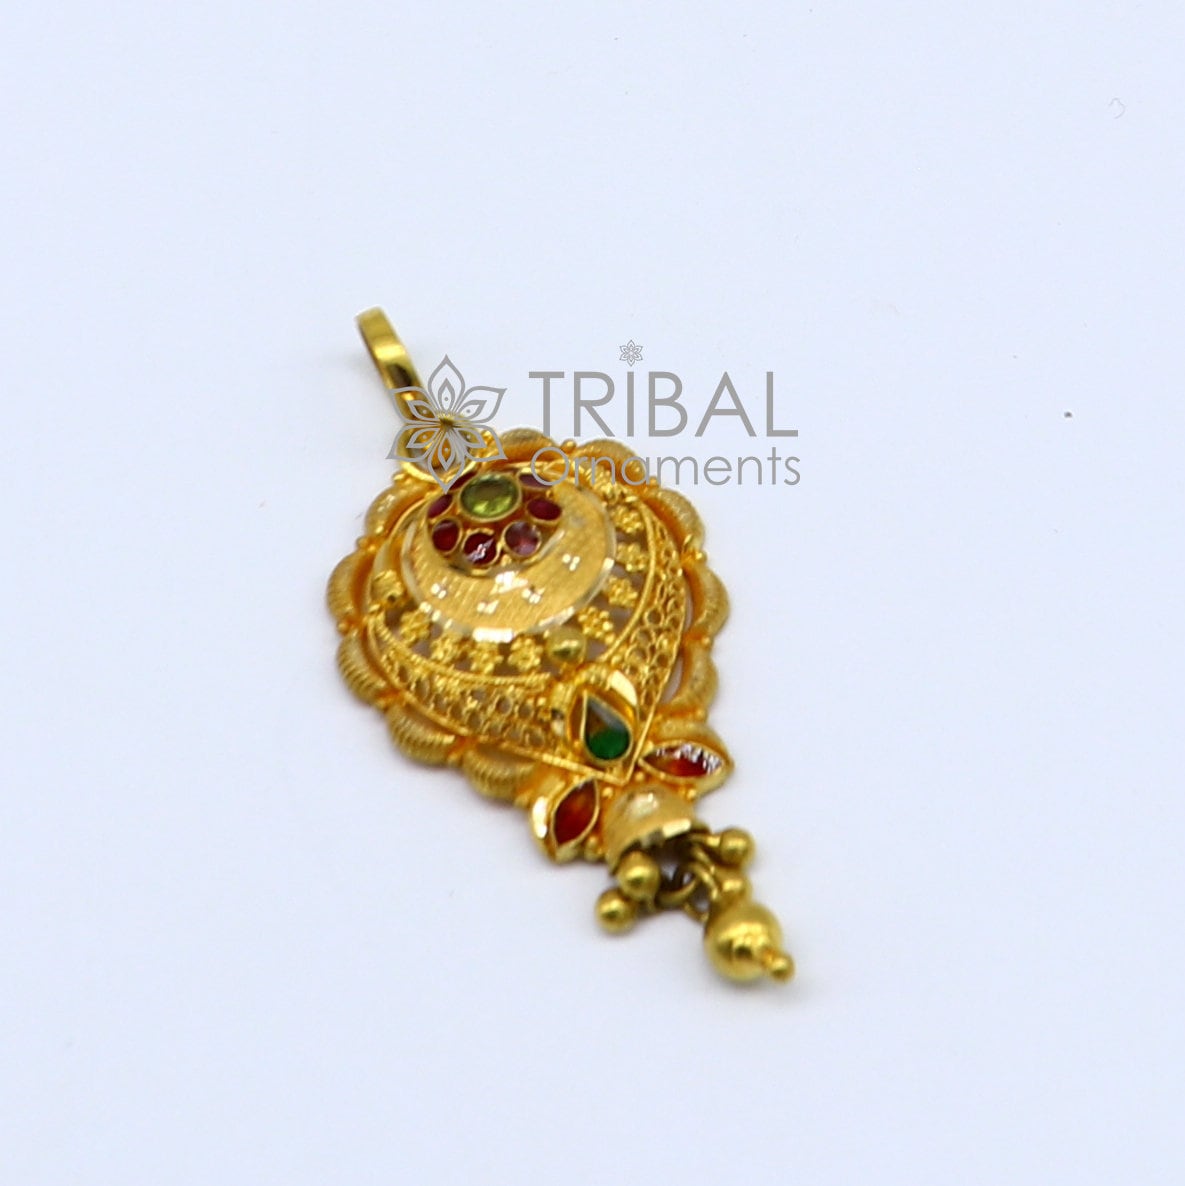 Floral design Traditional cultural filigree work trendy 22kt yellow gold functional pendant, amazing ethnic brides pendant jewelry gp27 - TRIBAL ORNAMENTS